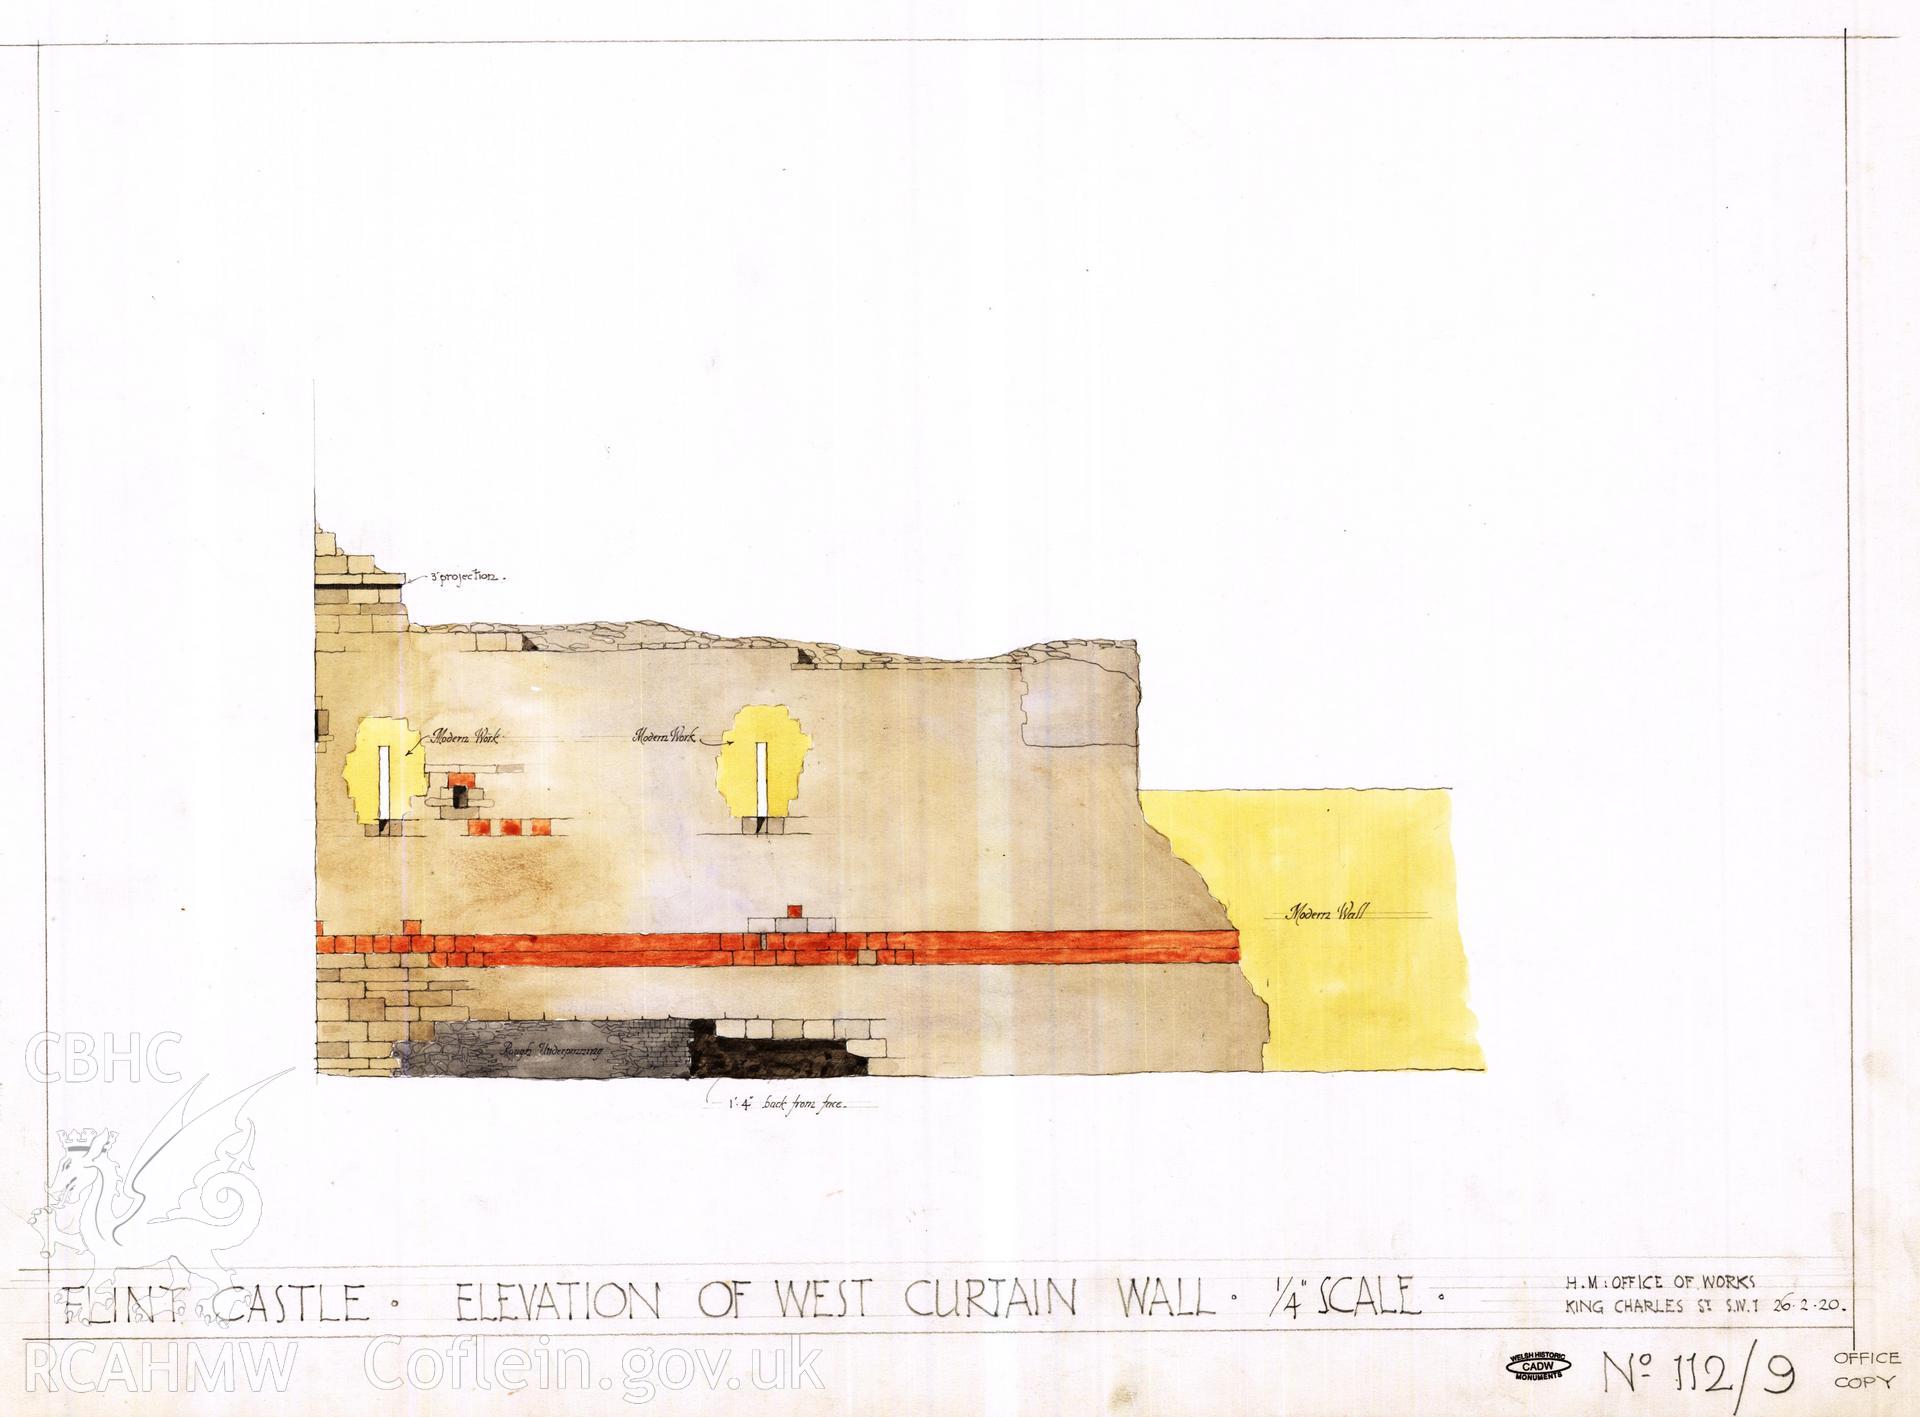 Cadw guardianship monument drawing of Flint Castle. W curtain, elevation (tinted). Cadw Ref. No:112/9. Scale 1:48.